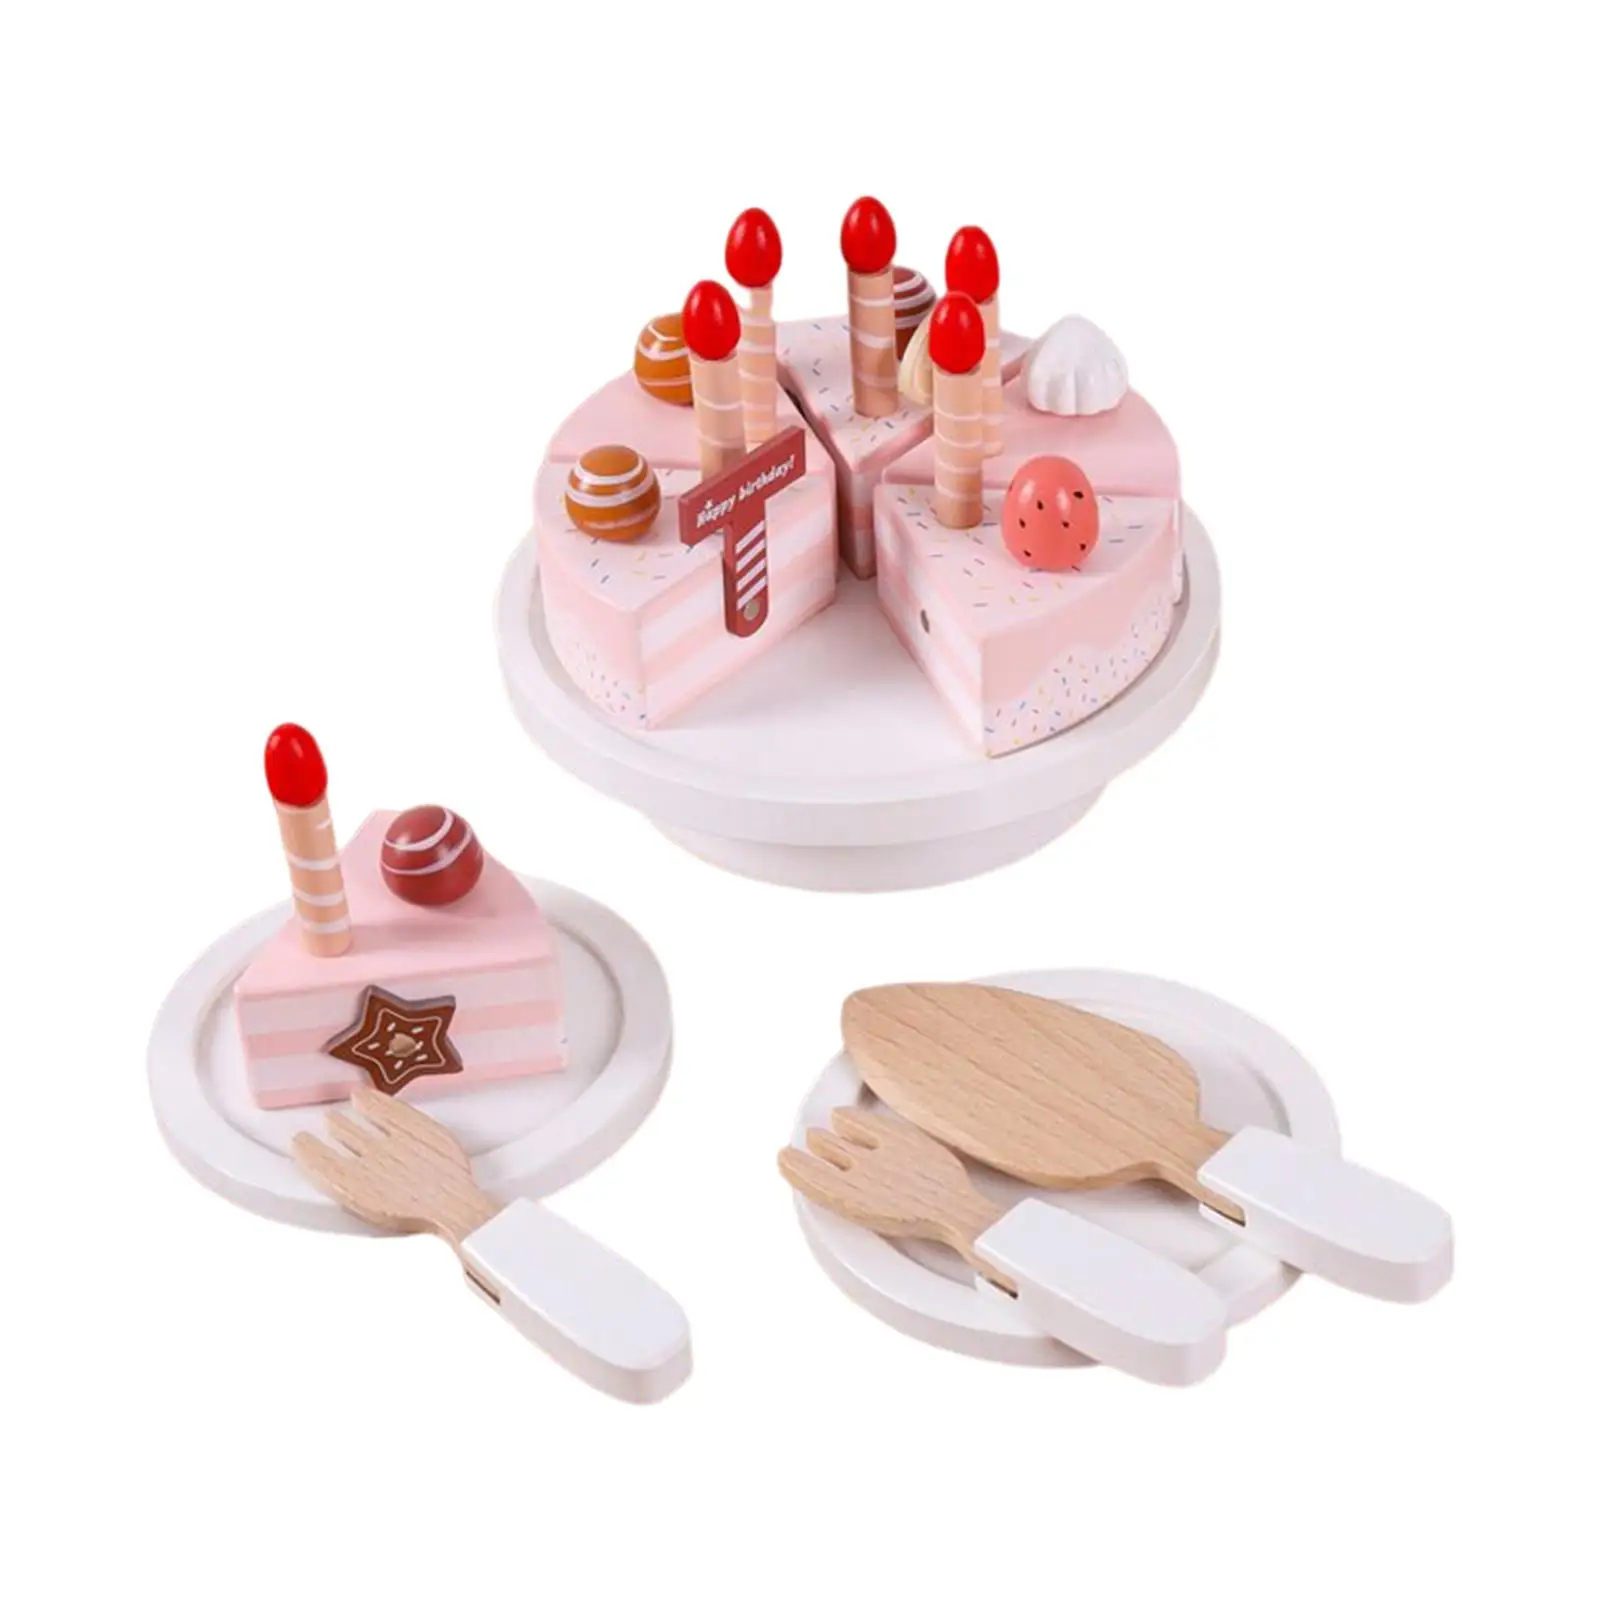 Simulation Wooden Birthday Cake Toys with Candles Role Play Toys Pretend Play Food Kitchen Toys for Toddlers Boys Birthday Gifts